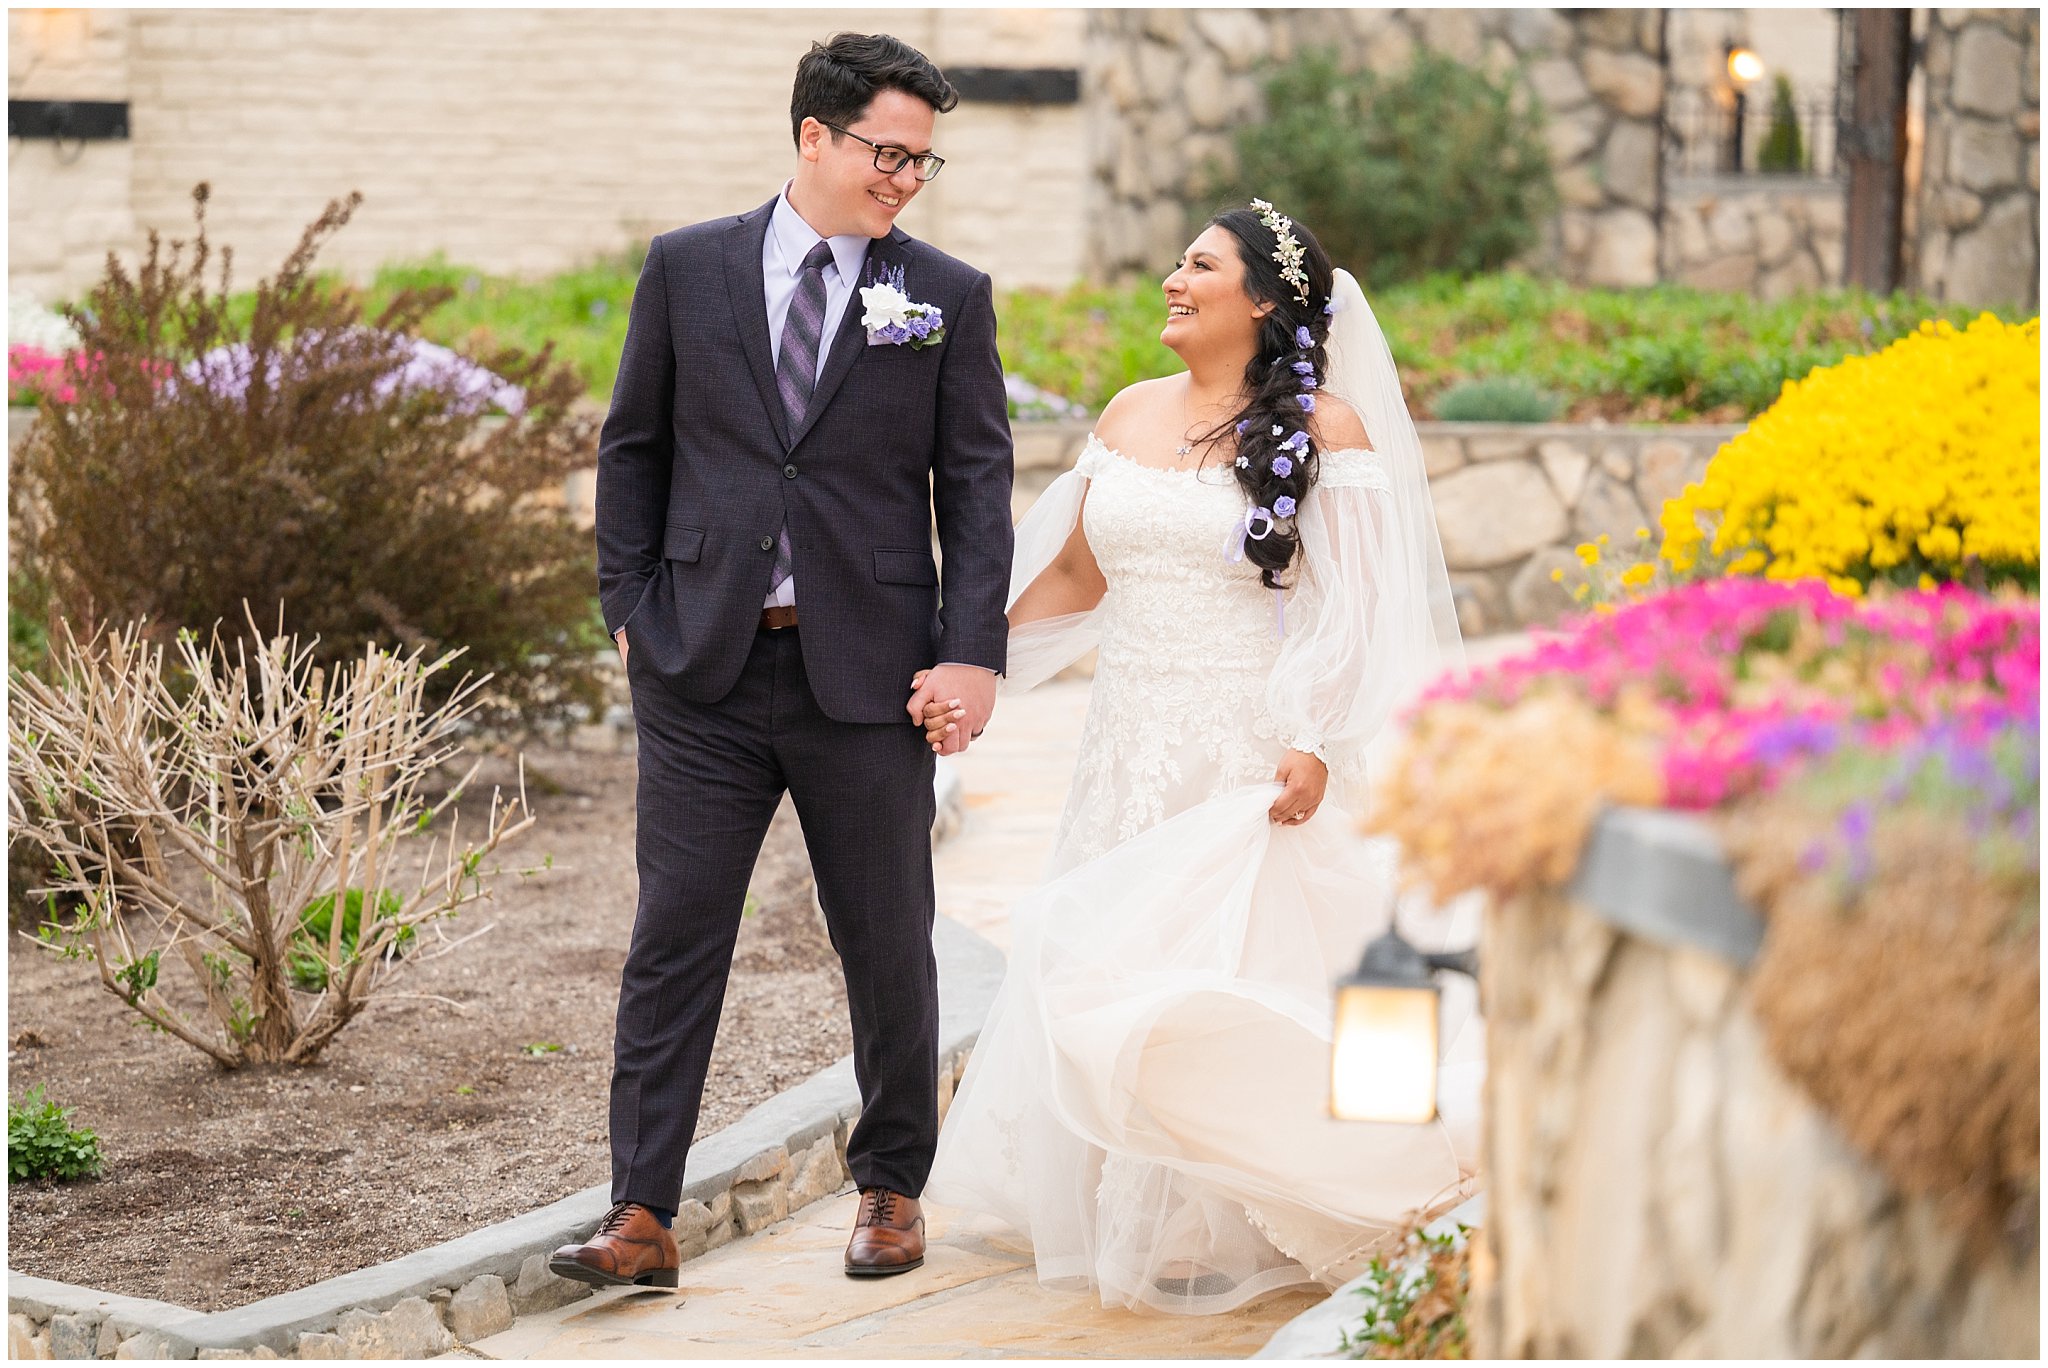 Bride and groom portraits during golden hour outside castle | Wadley Farms Spring Castle Wedding